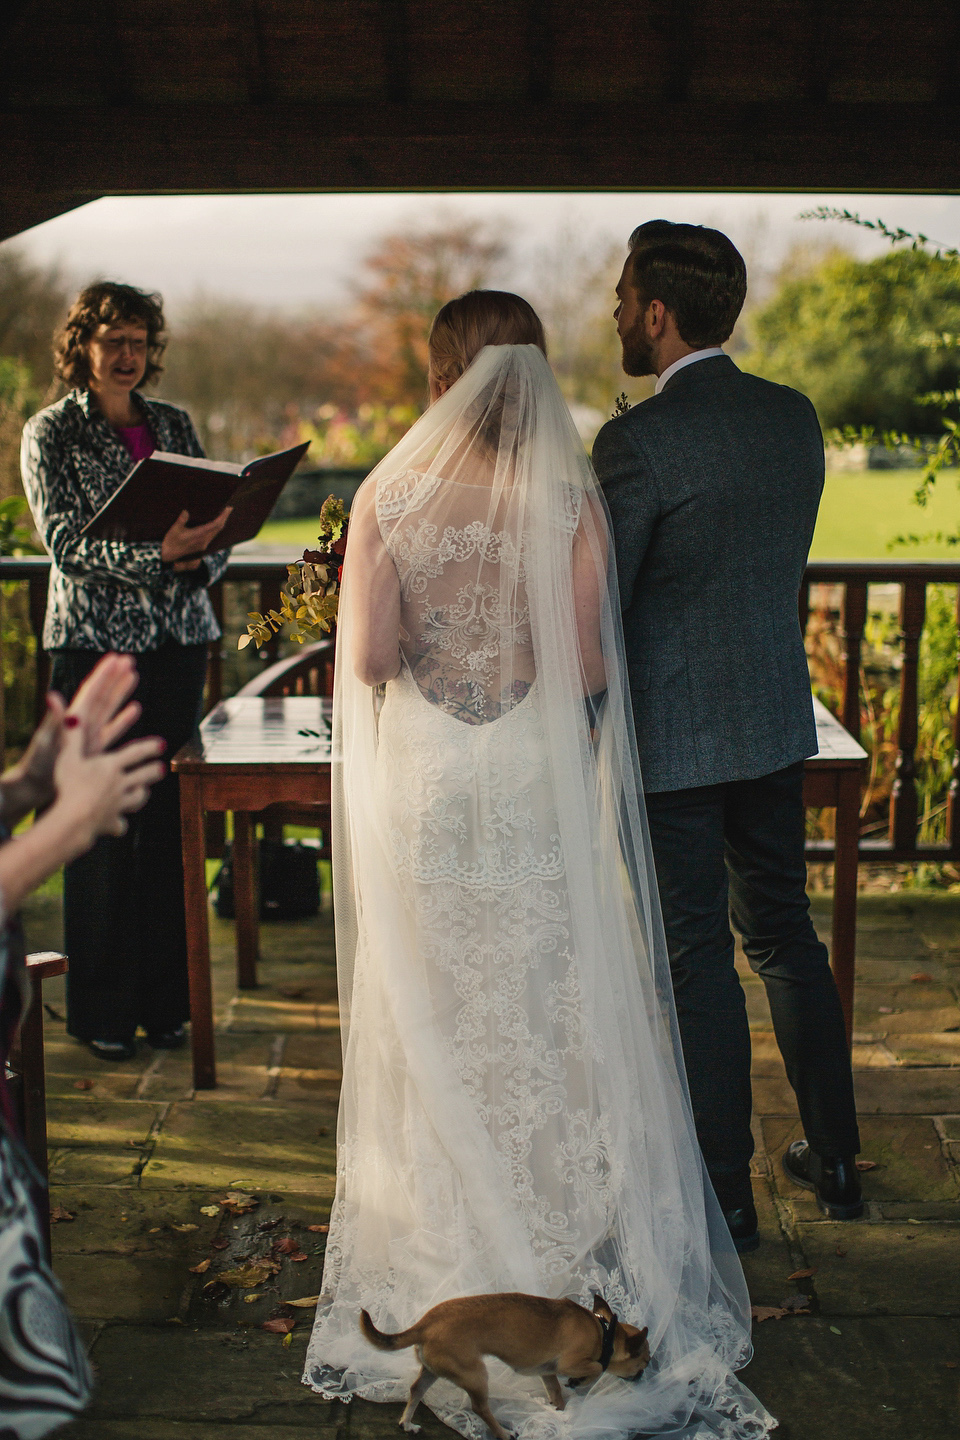 Iris by Claire Pettibone for an Intimate Outdoor Winter Wedding. Photography by S6 Photography.